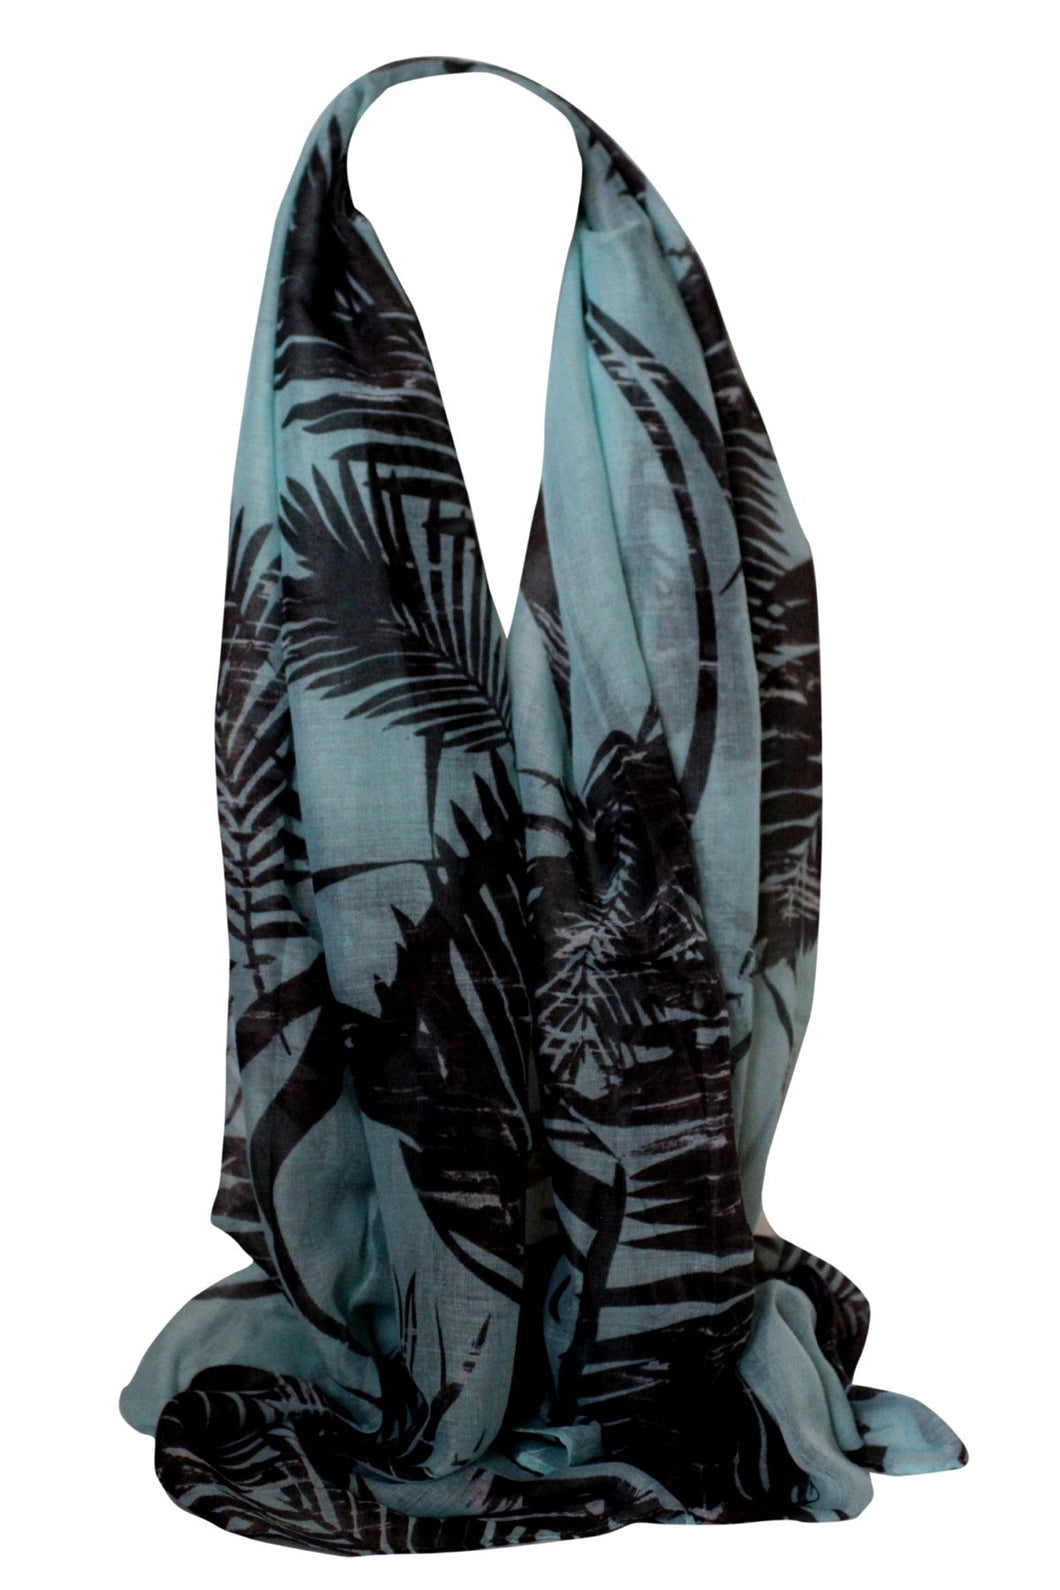 Palm Leaves Print Cotton Feel Scarf Shawl Wrap Stole Head Scarves Sarong